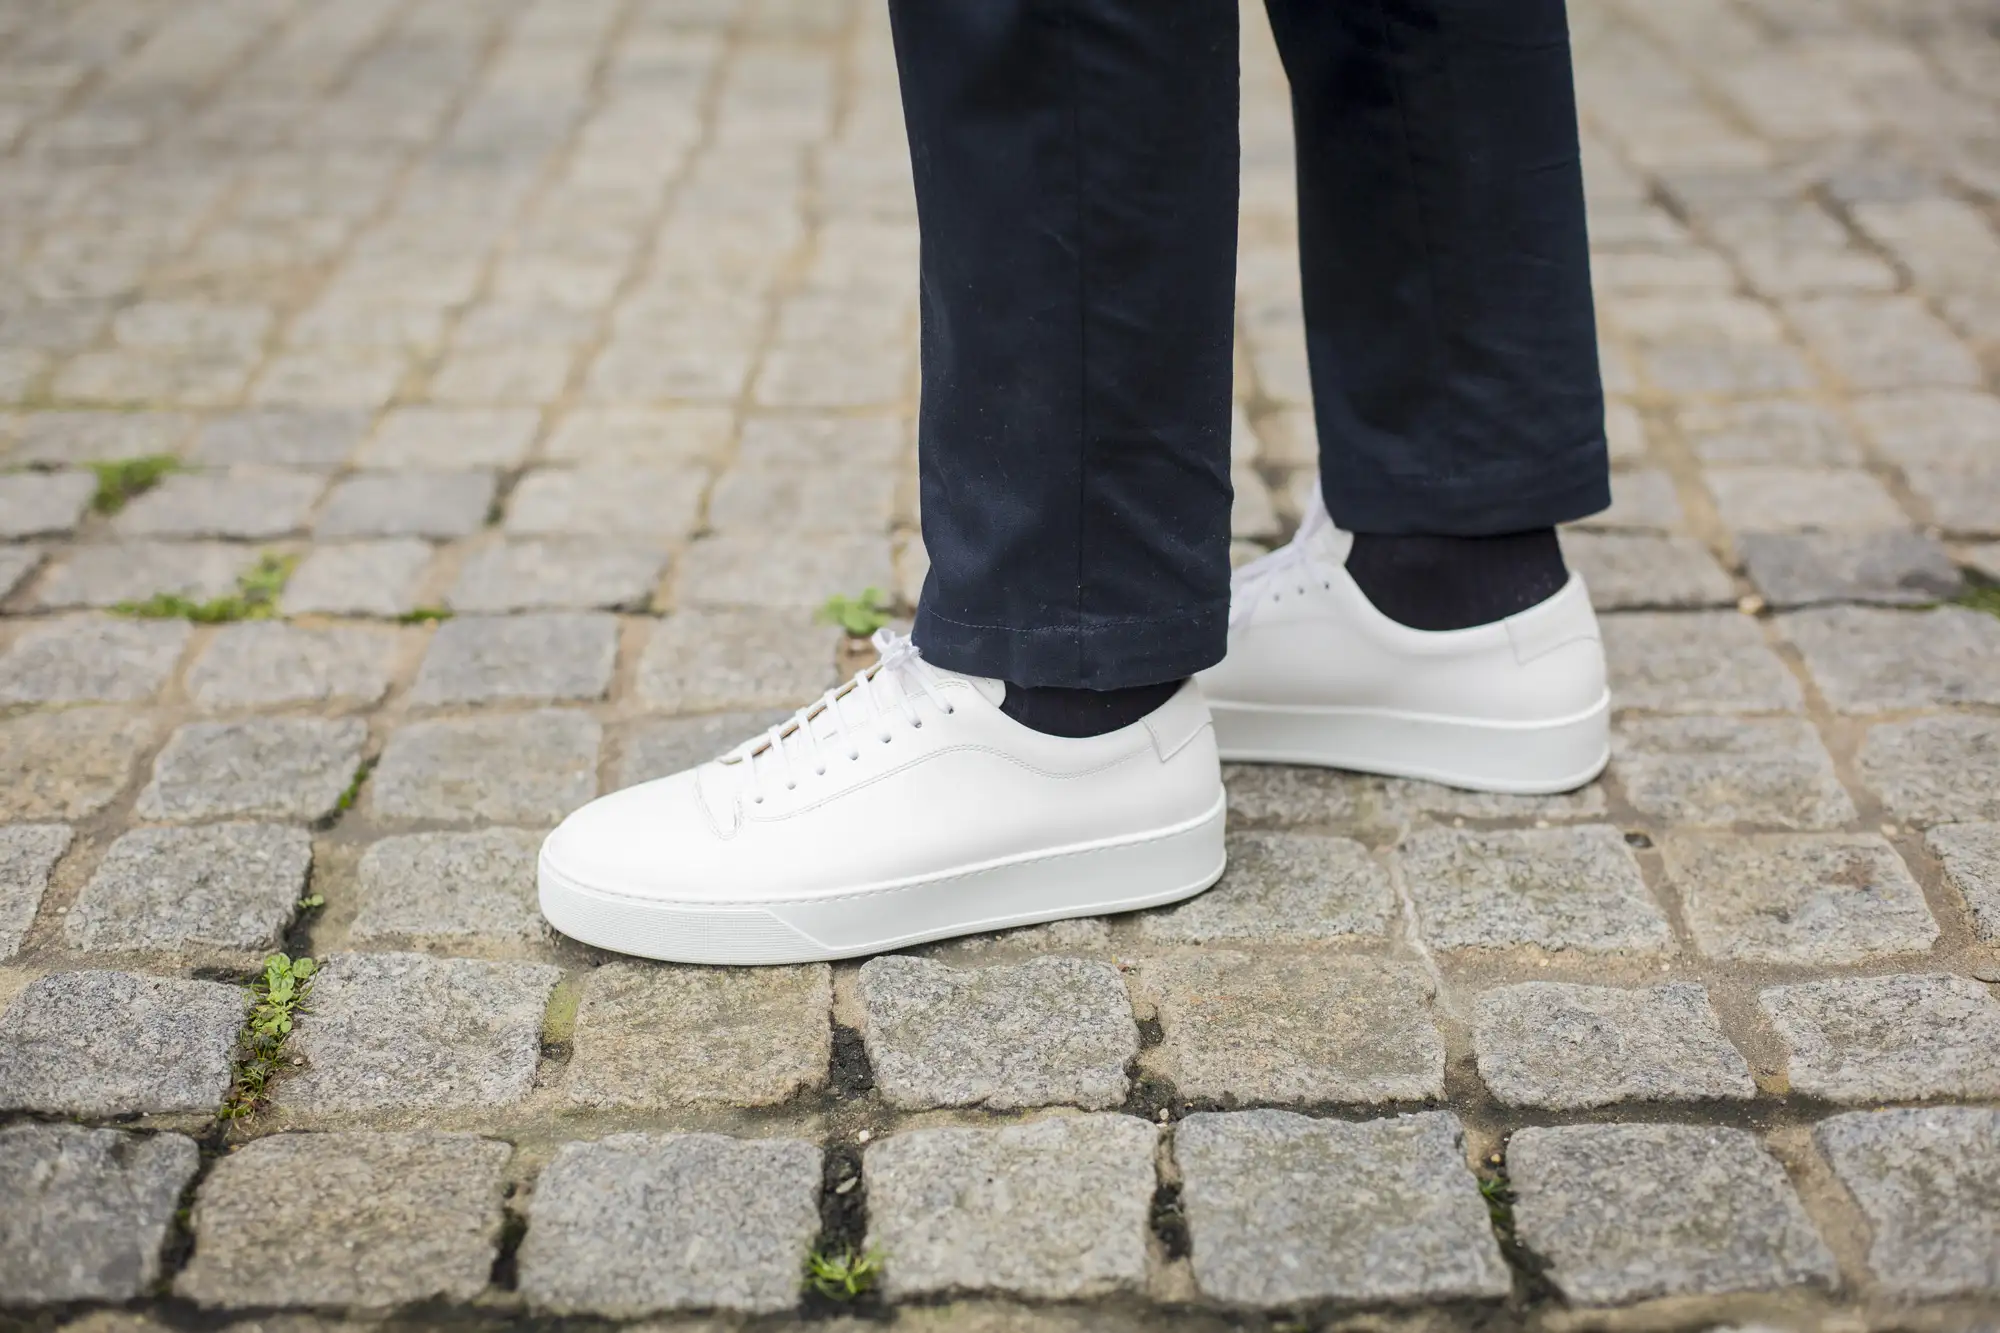 J.FitzPatrick Sneakers Round 1 - Now Available! - The Shoe Snob Blog